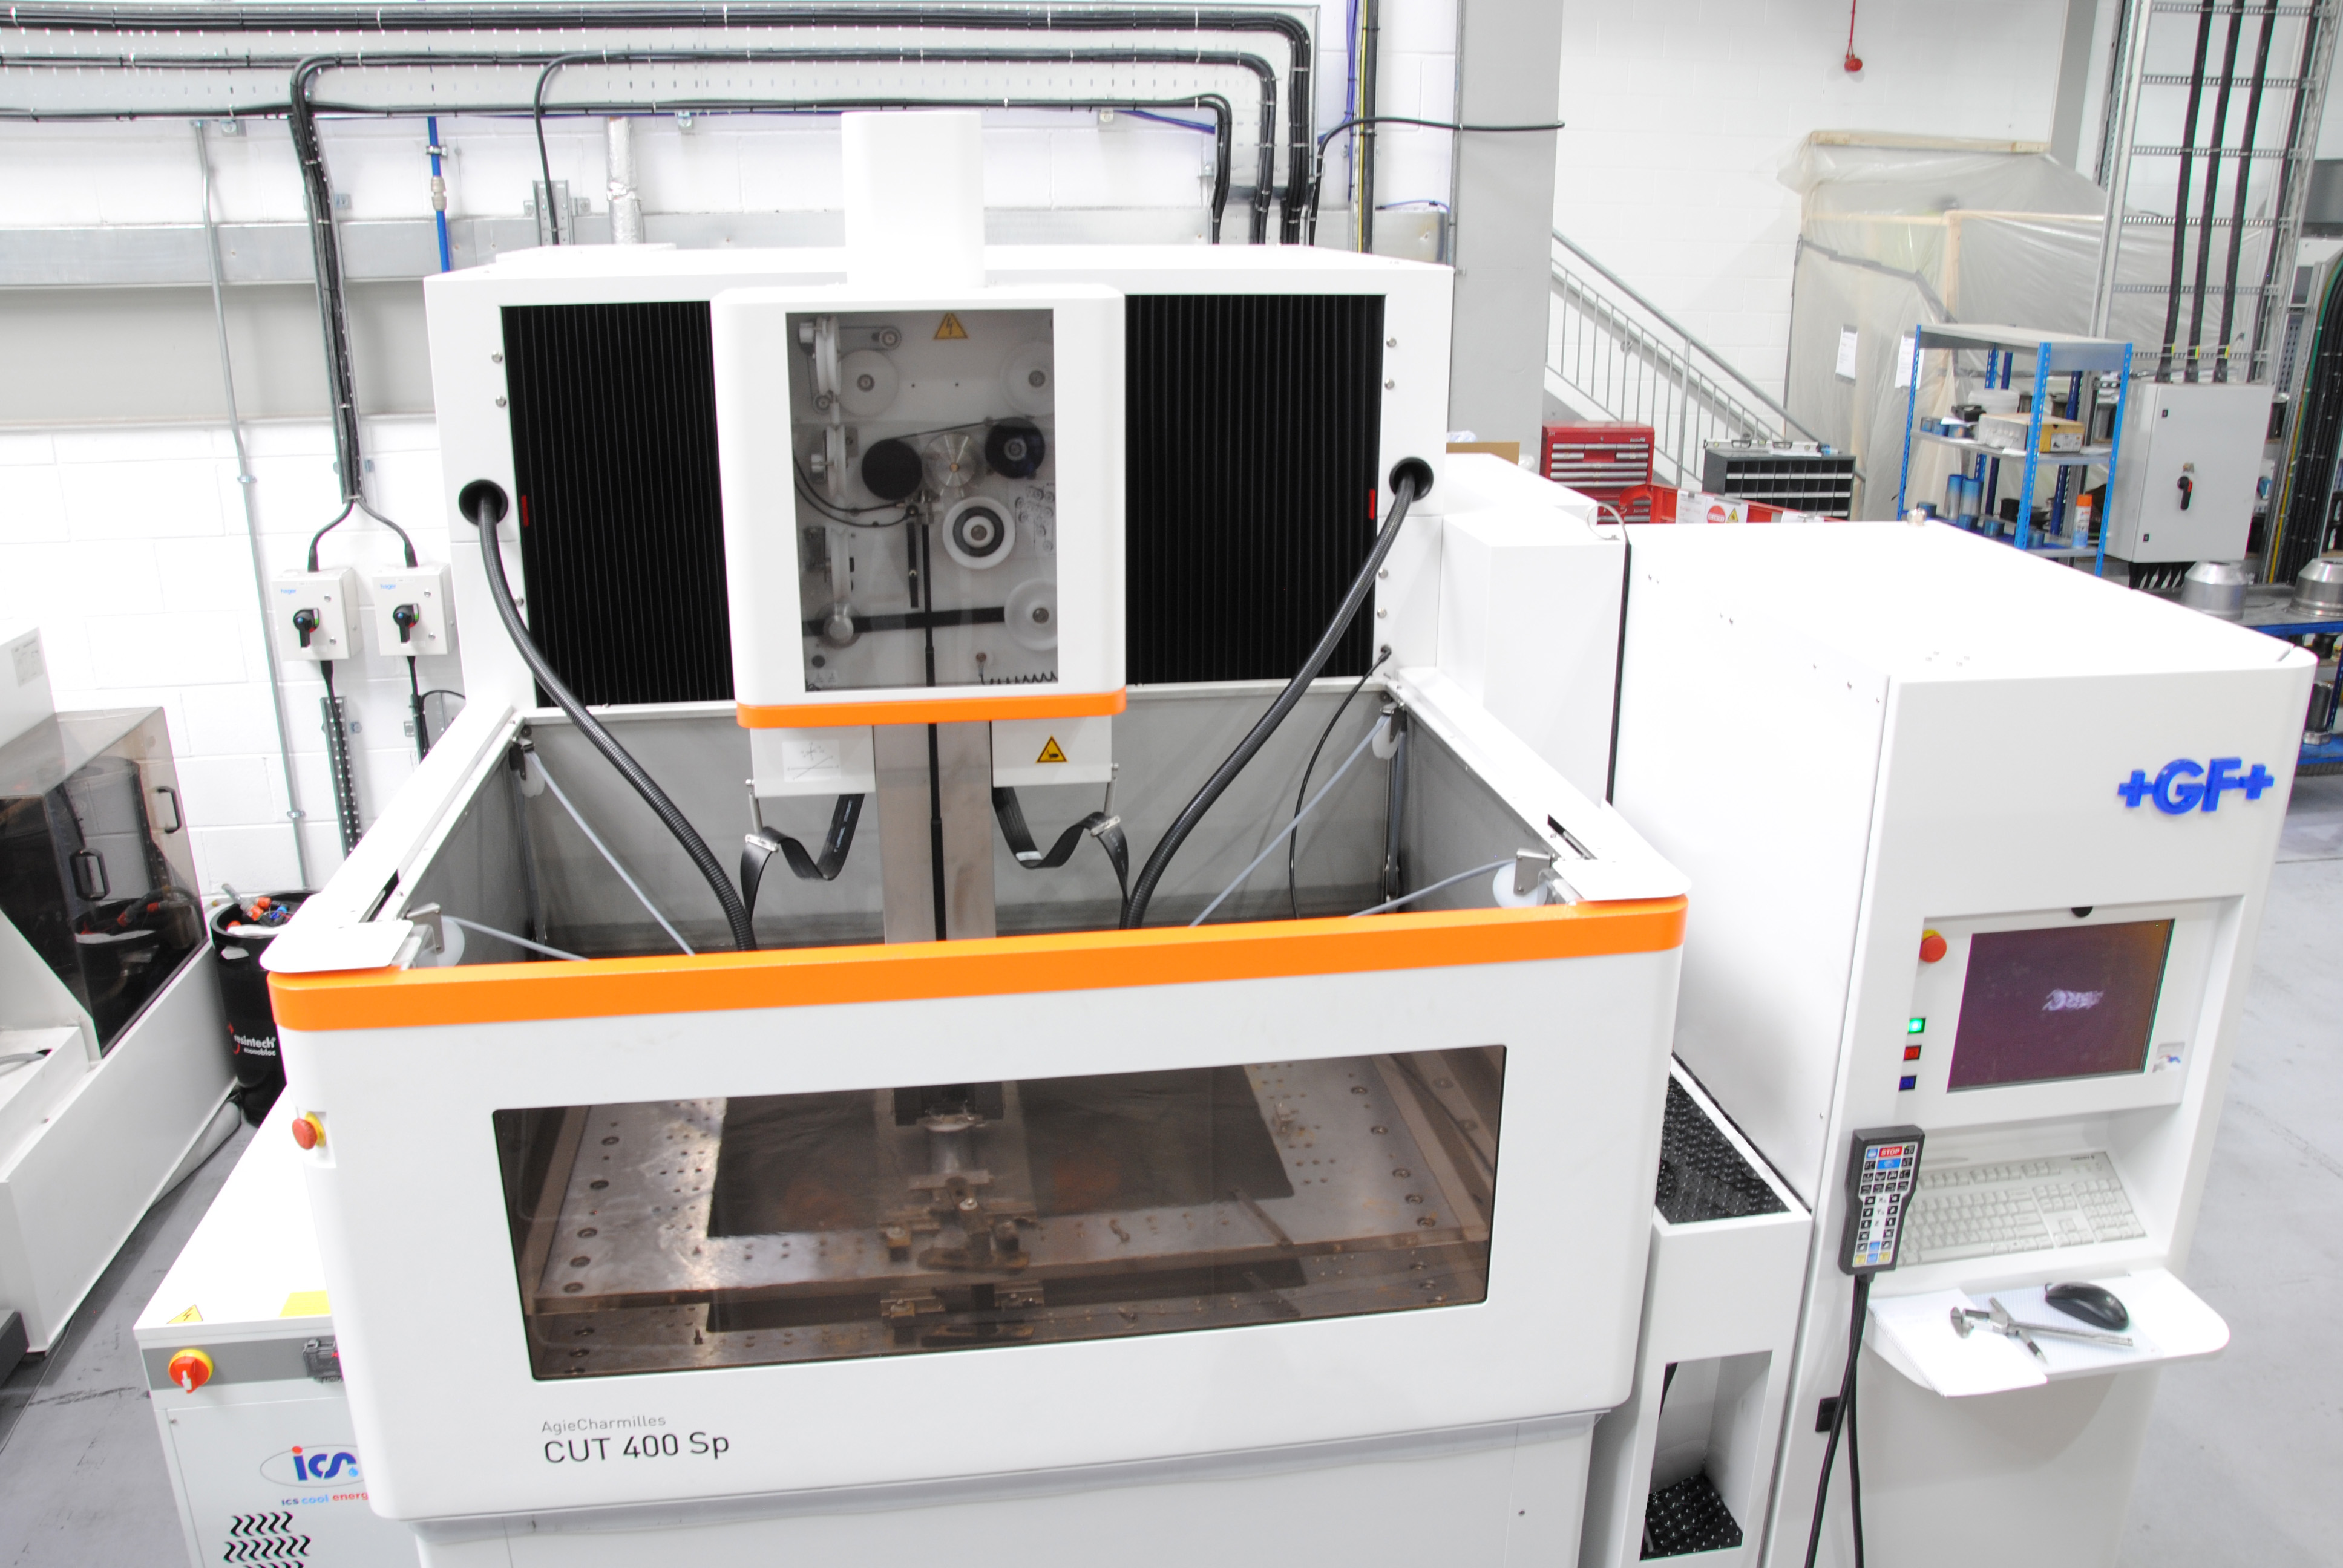 The new EDM system is faster than the centre’s original and can cut through much larger pieces of metal.